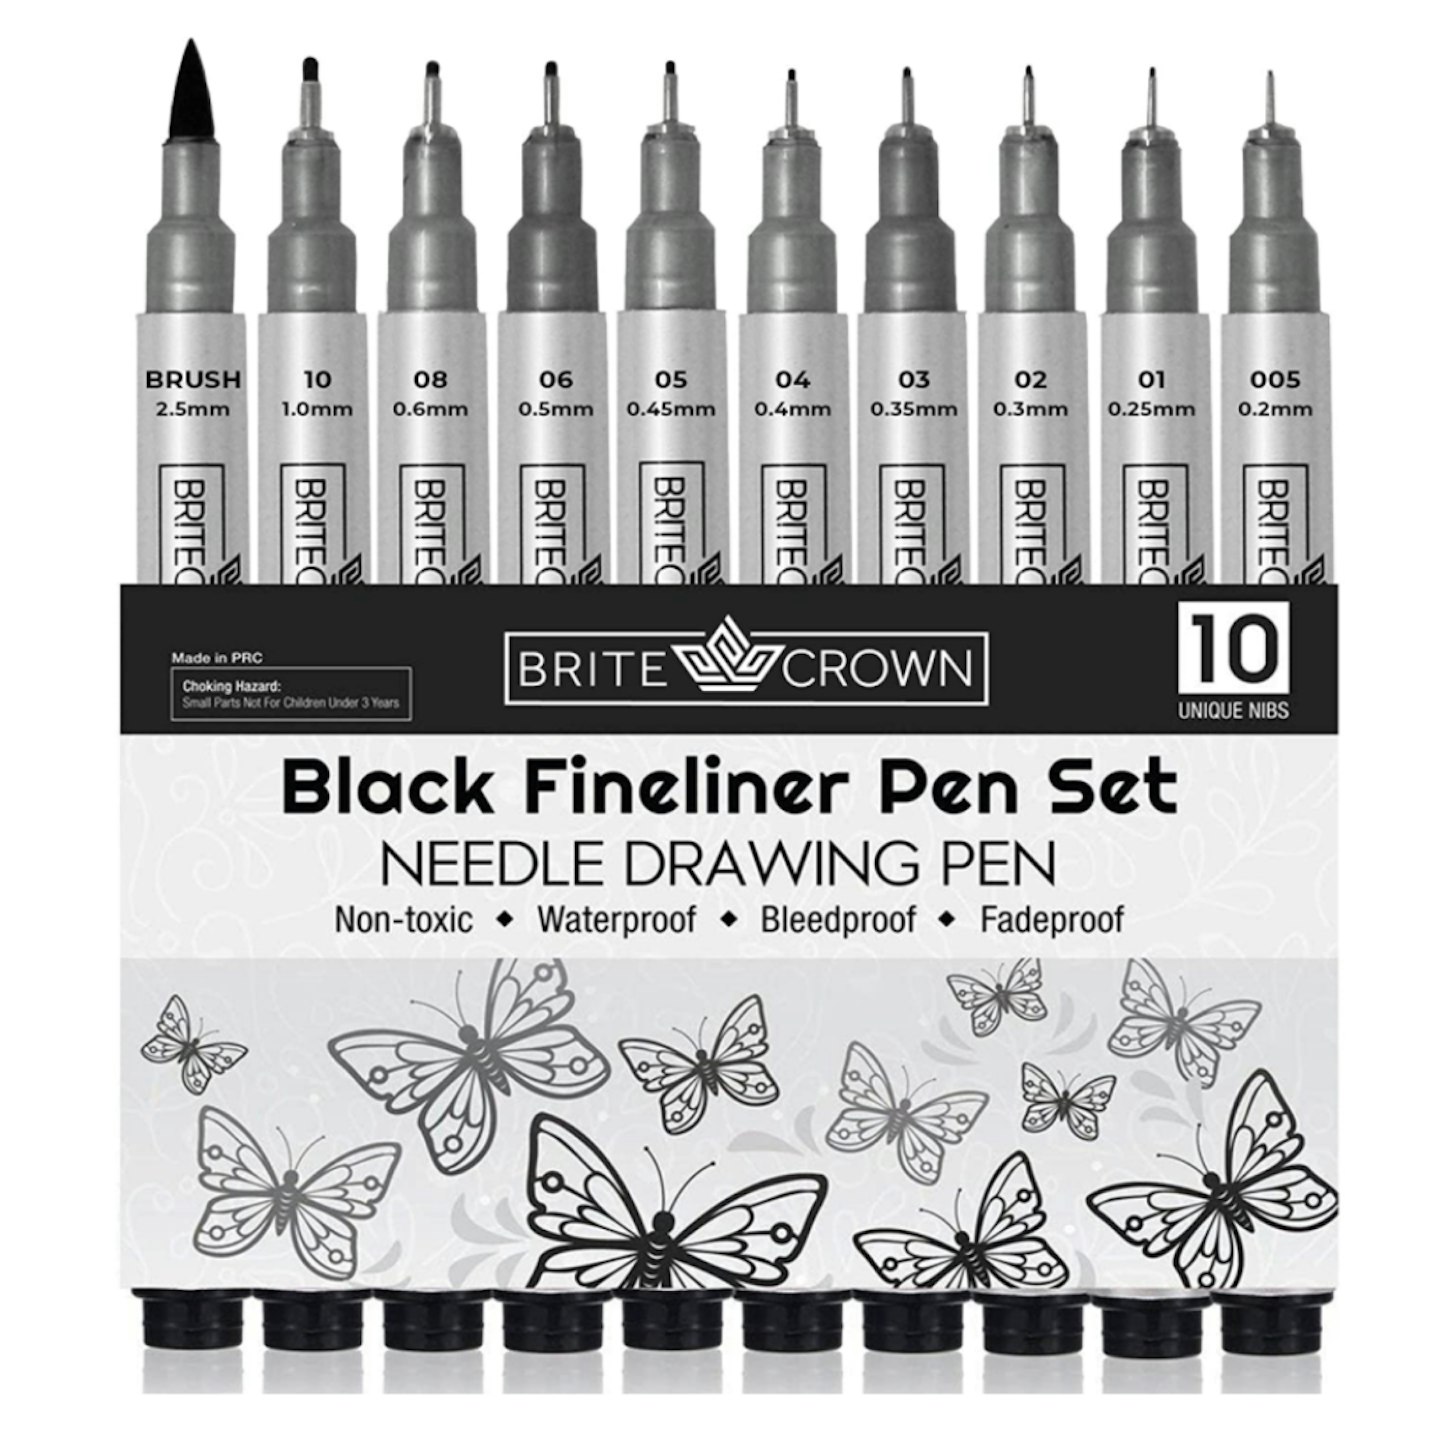 The best drawing pencils for UK artists